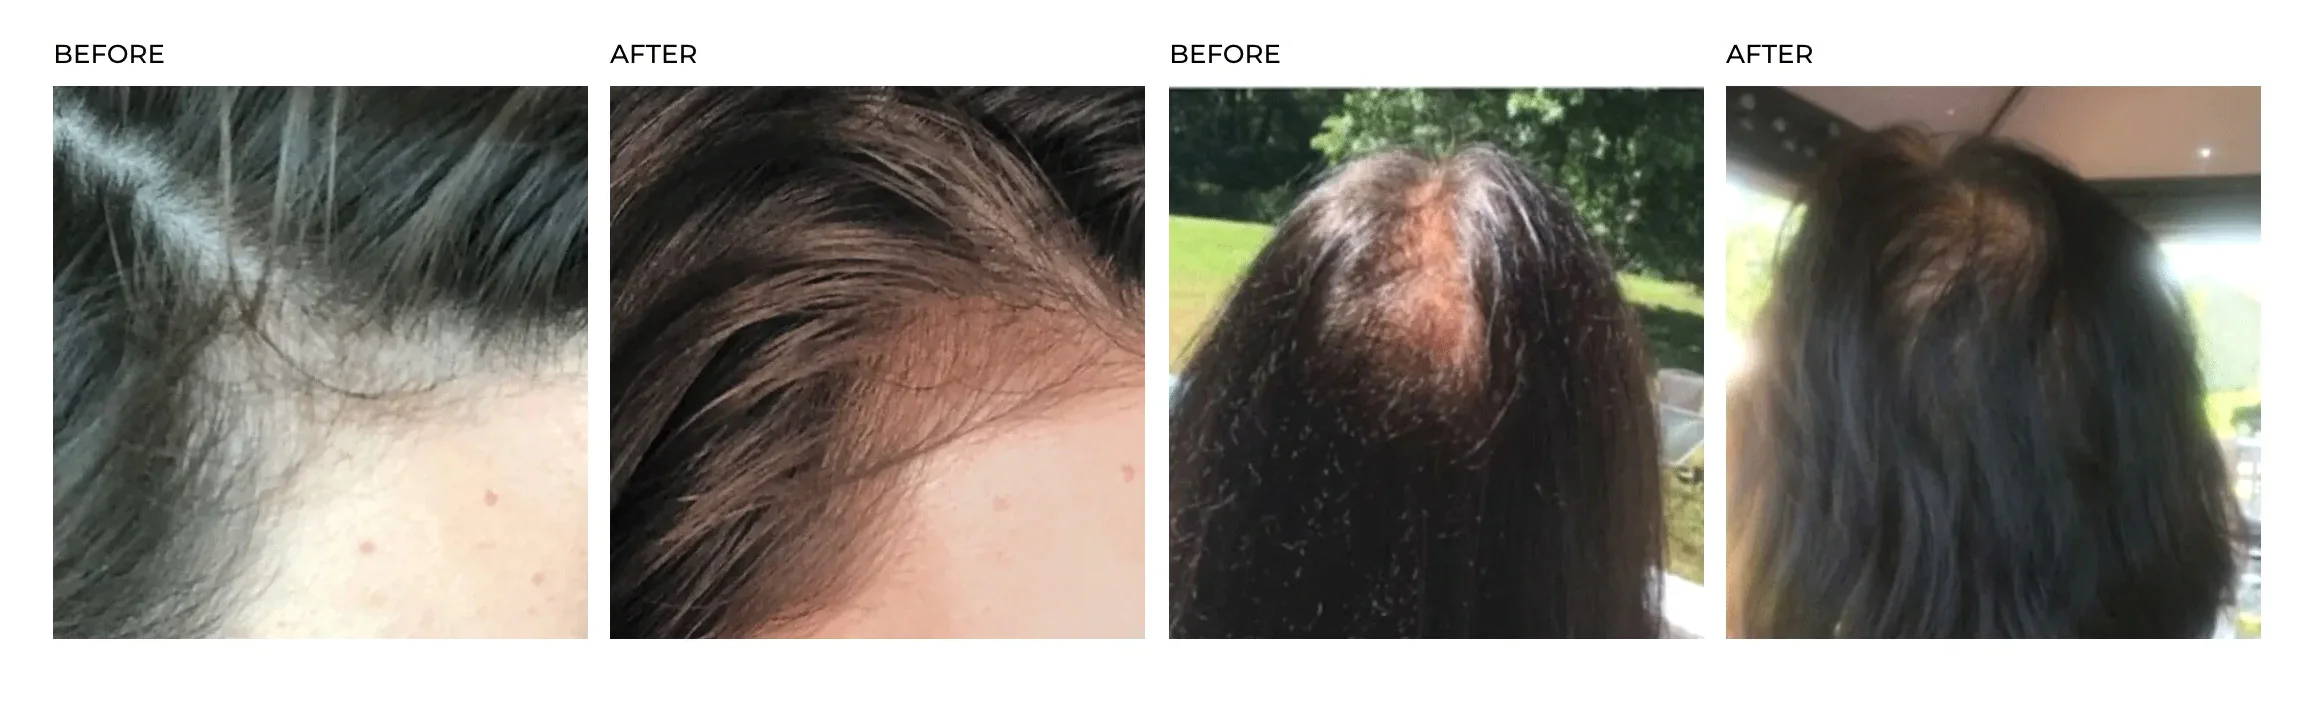 DeeplyRooted_Before_After_3